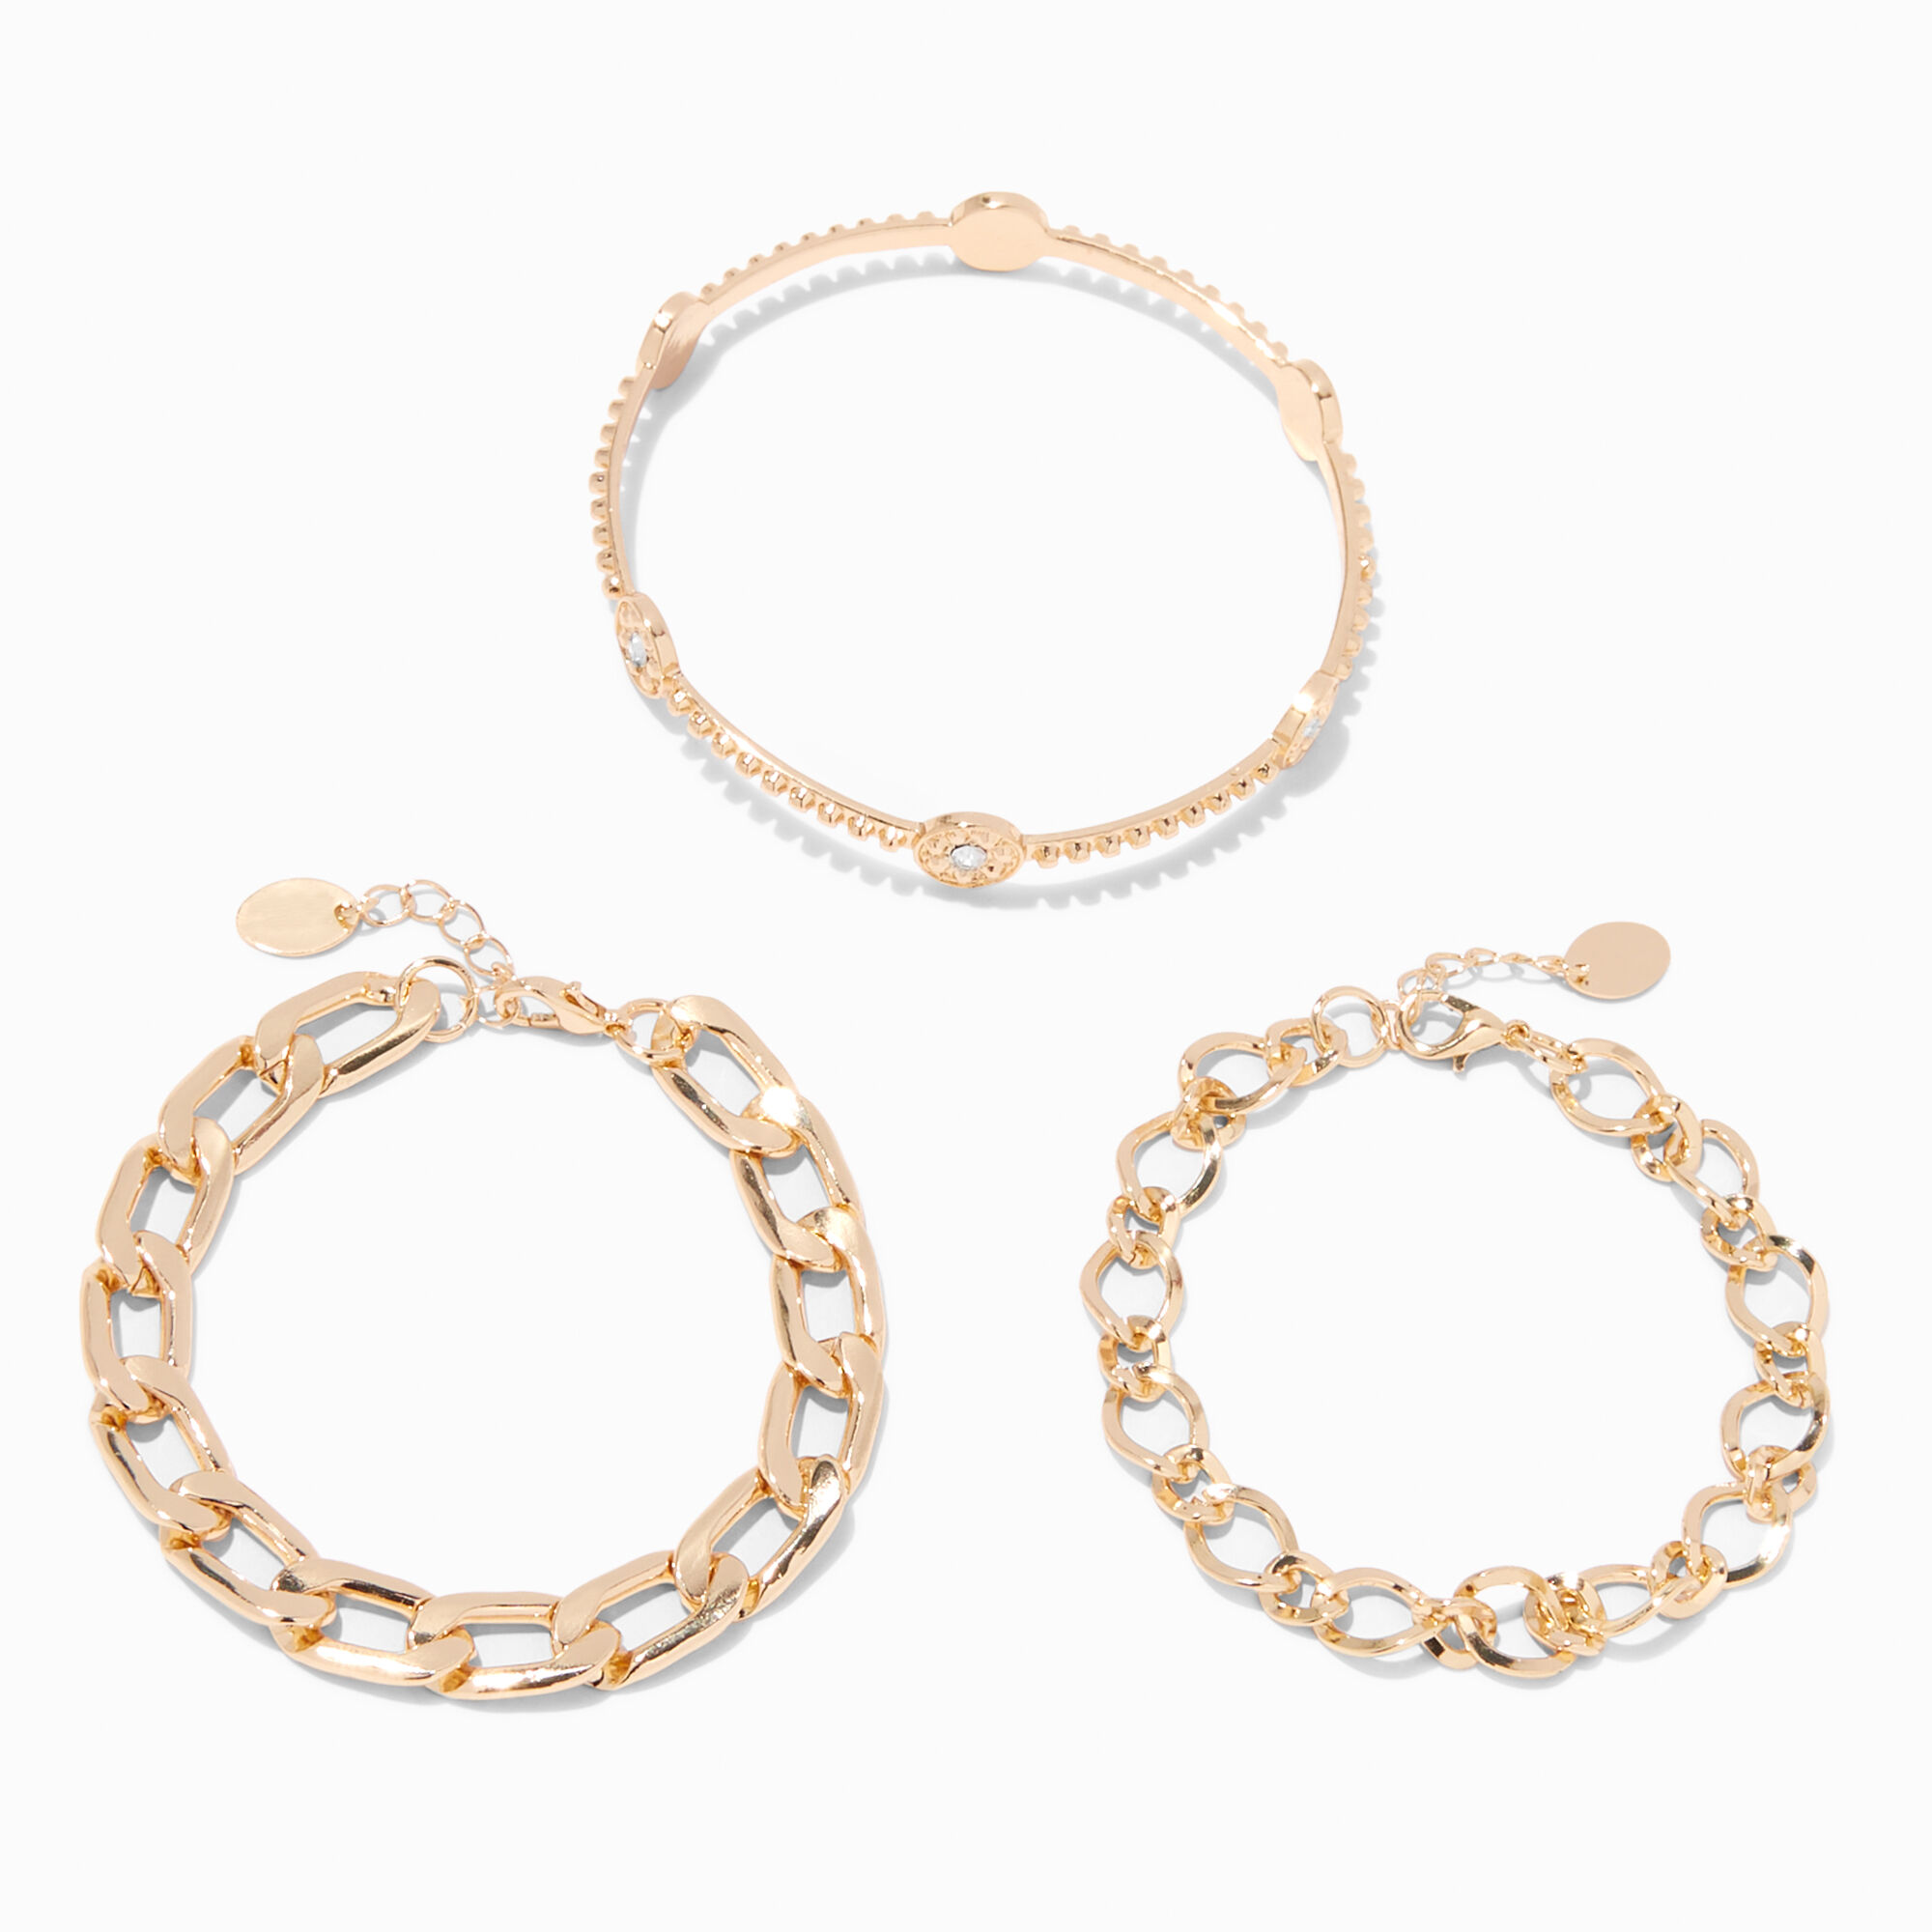 View Claires Tone Link Chain Bangle Bracelets 3 Pack Gold information